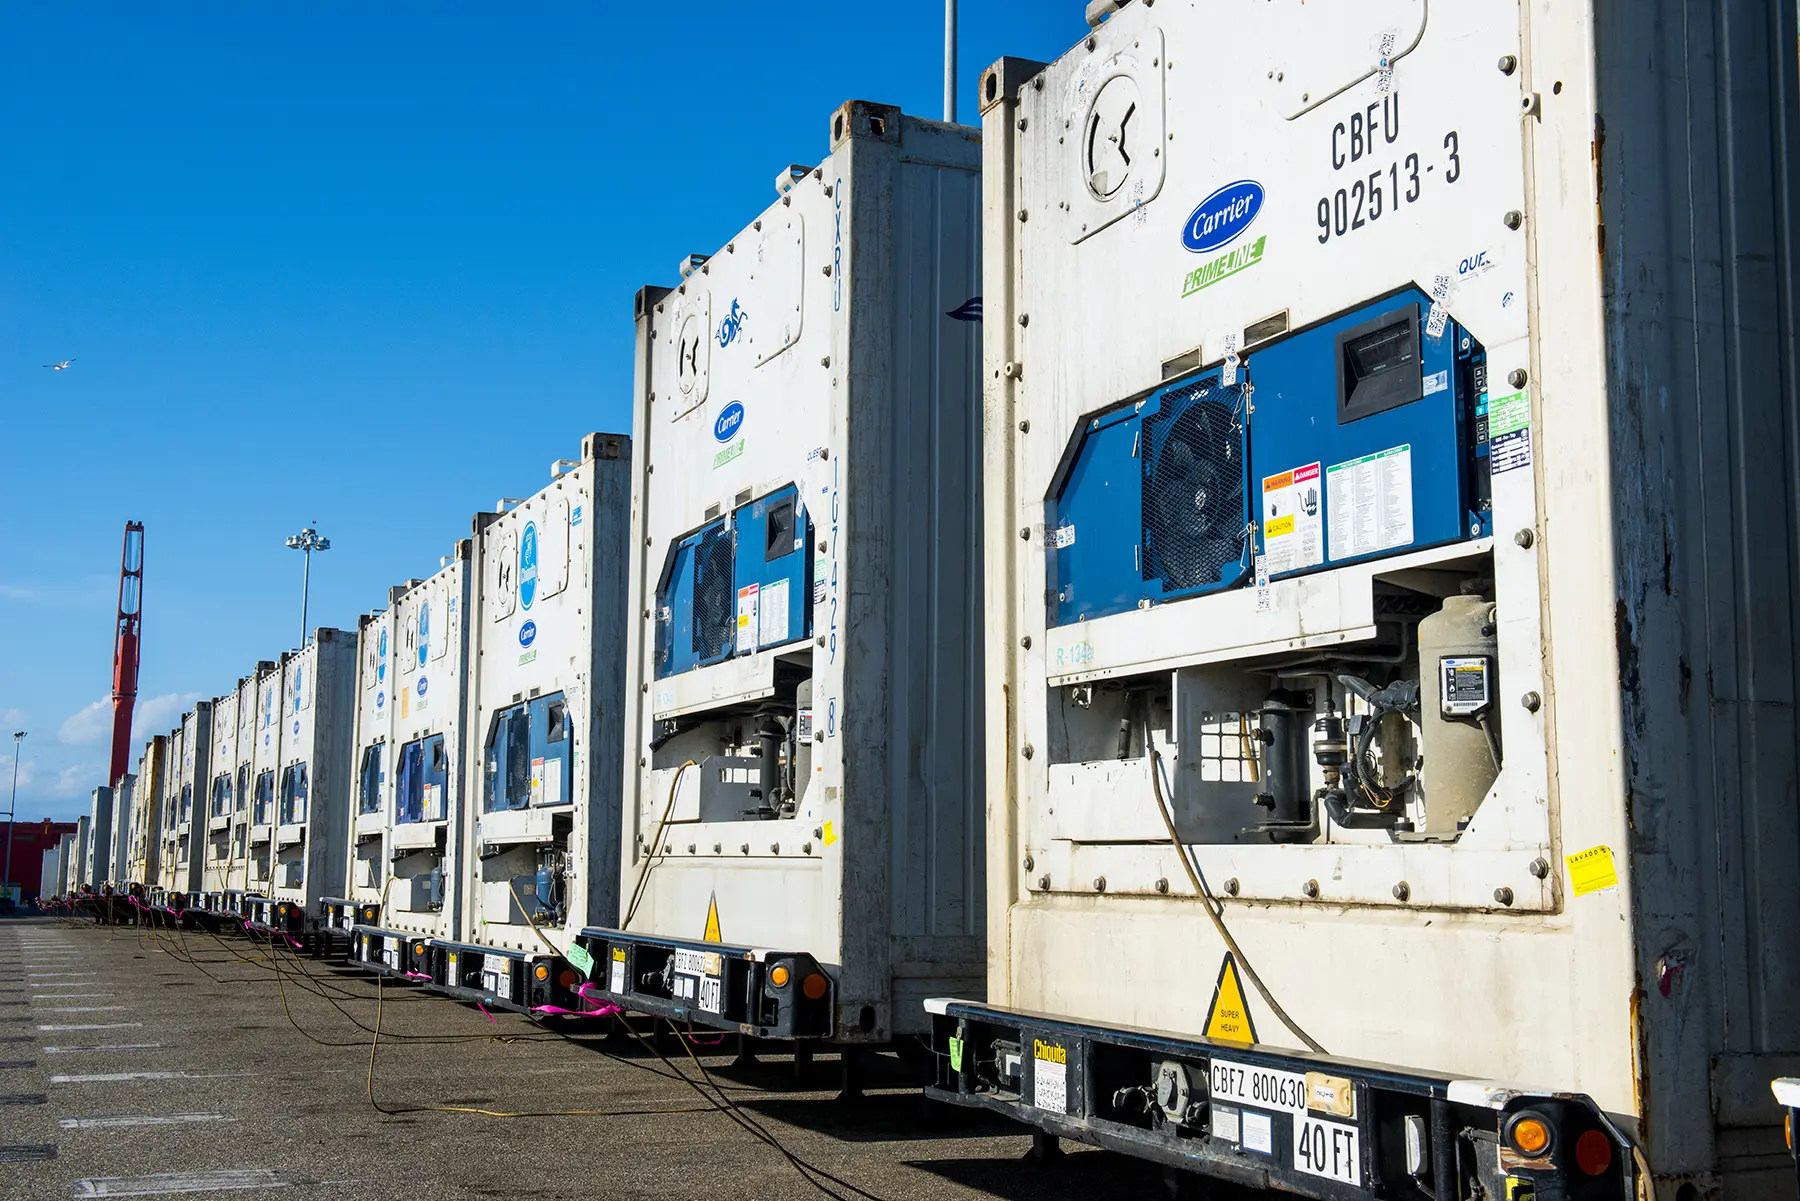 Line of cargo containers showing the air conditioning units.